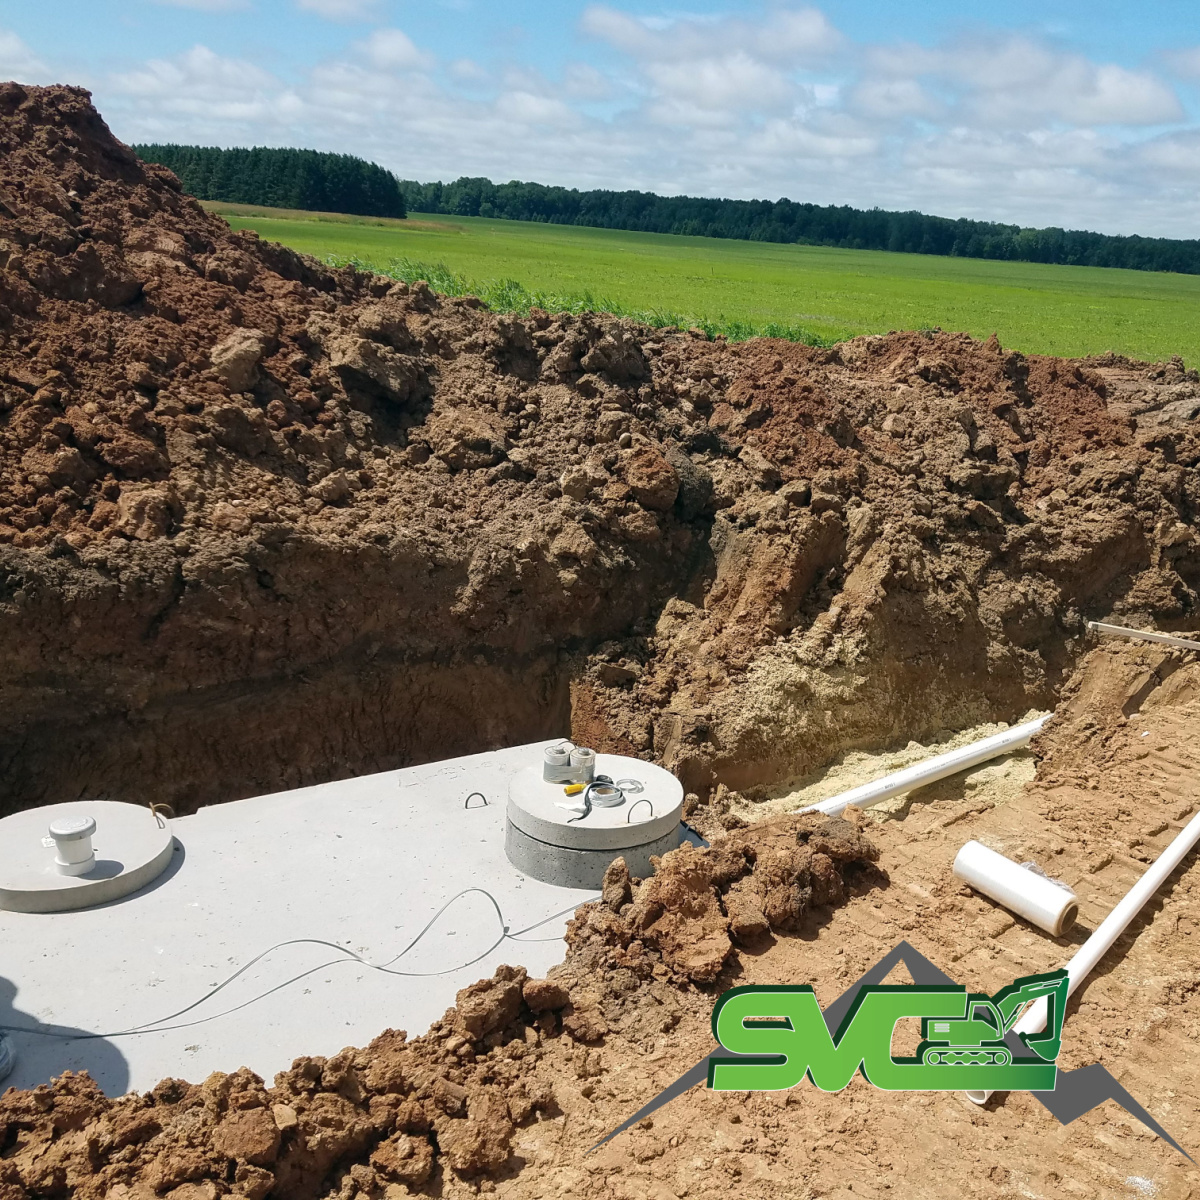 Schleg Valley Construction: Premier Septic Drain Field Repair Service in Woodway!